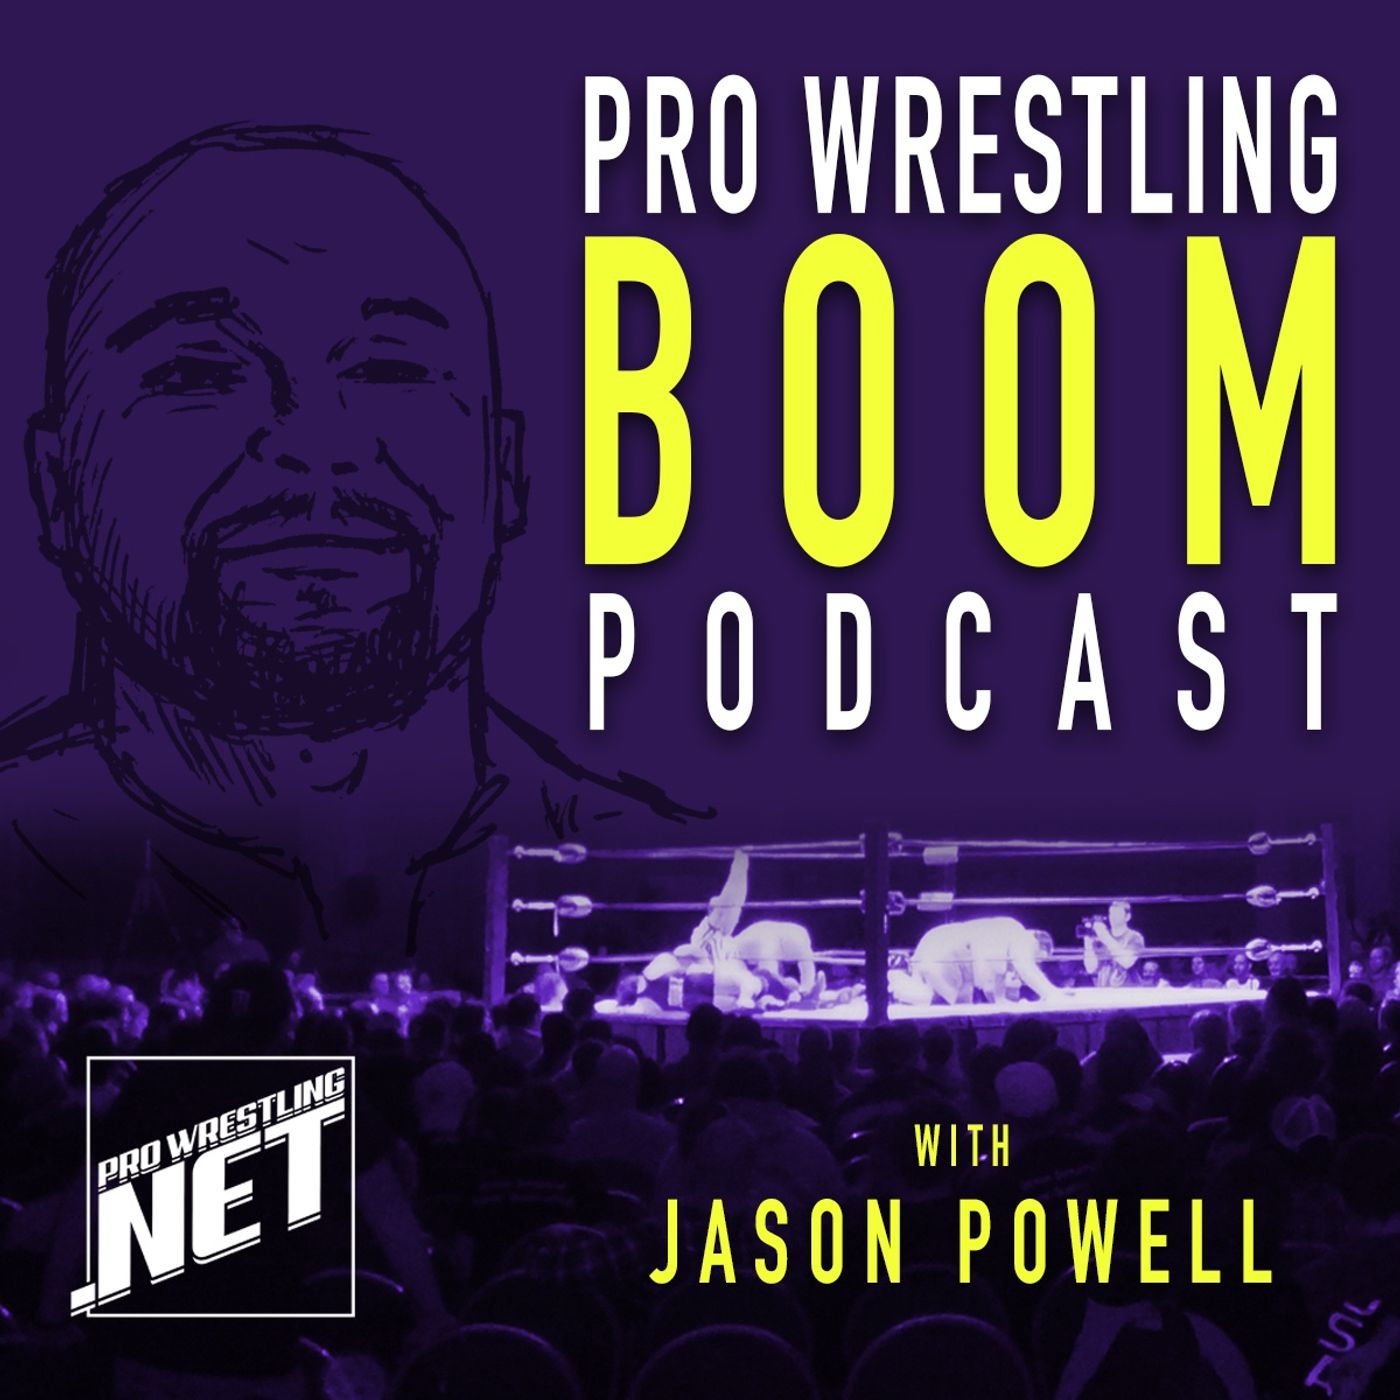 08/30 Pro Wrestling Boom Podcast With Jason Powell (Episode 124): WWE Payback review with Jake Barnett